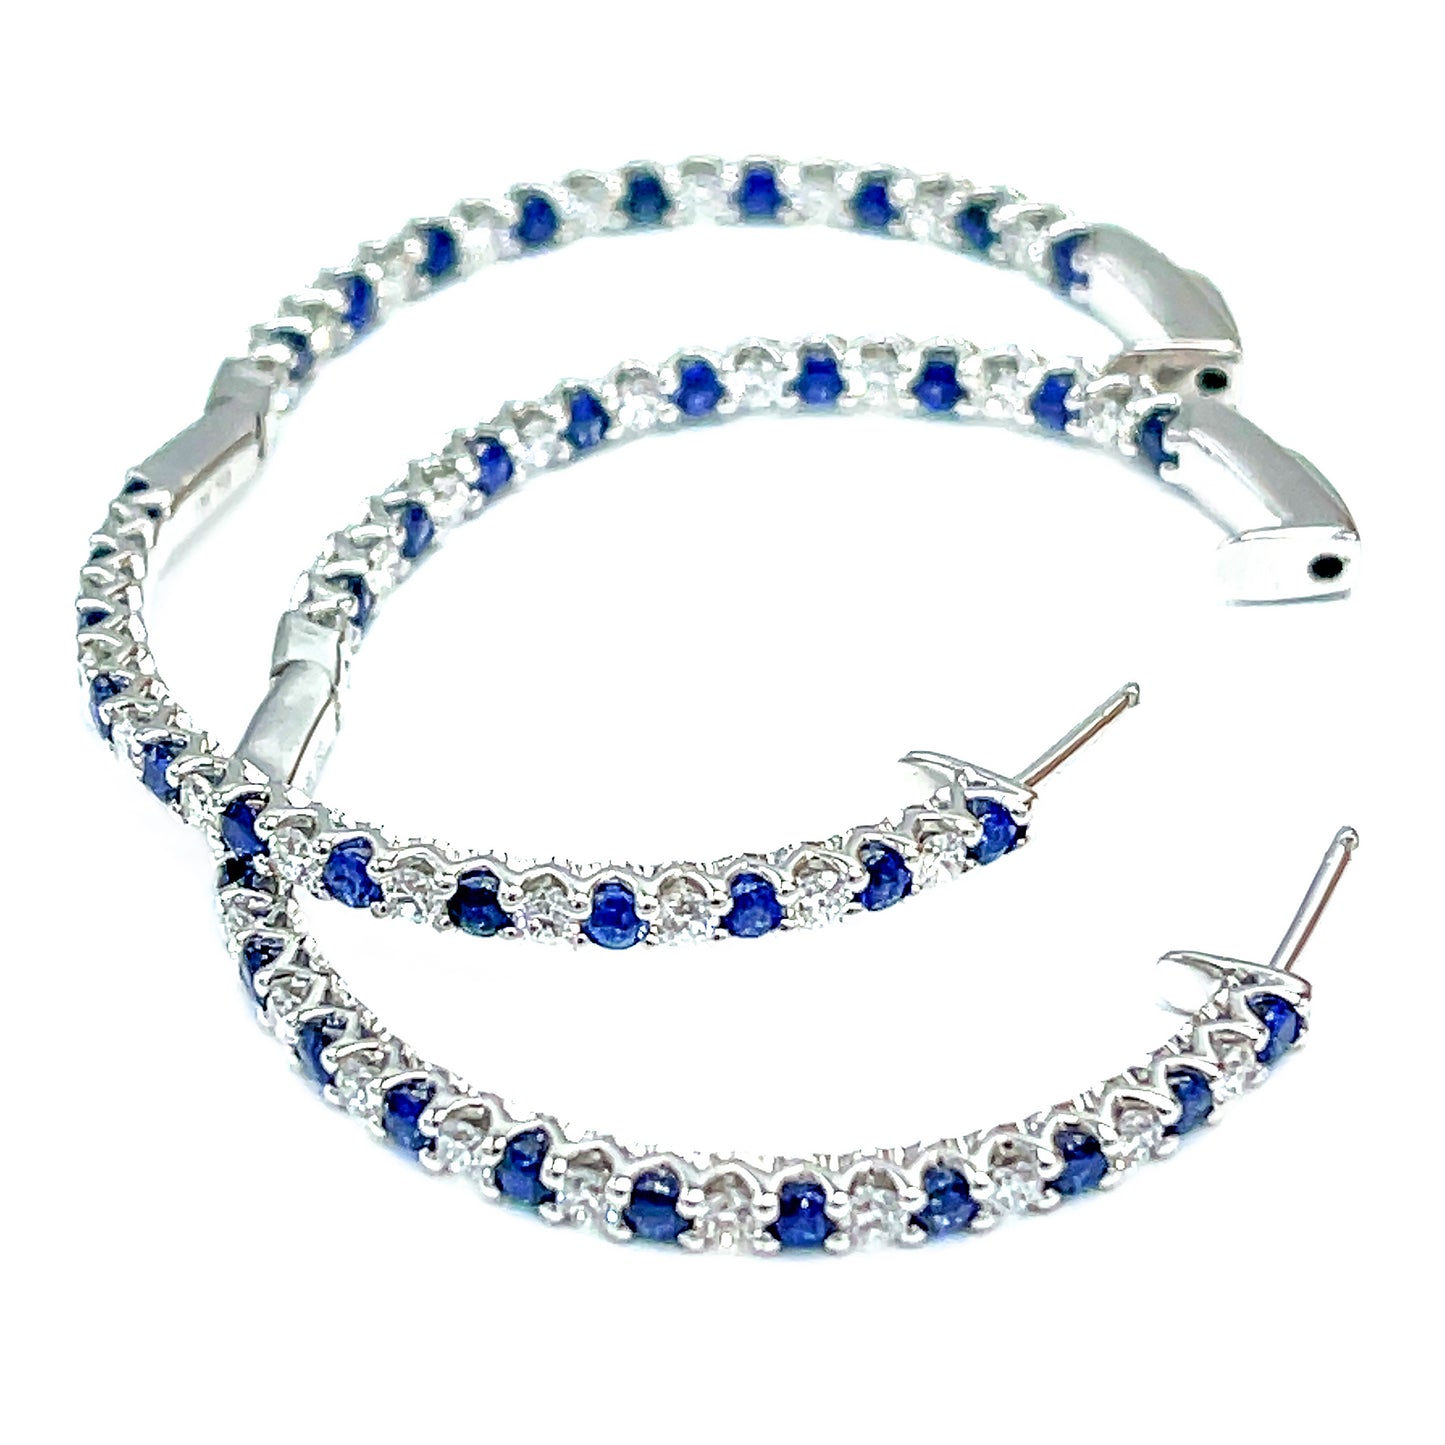 Load image into Gallery viewer, 18 kt White Gold Sapphire and Diamond Inside and Out Hoop Earrings
